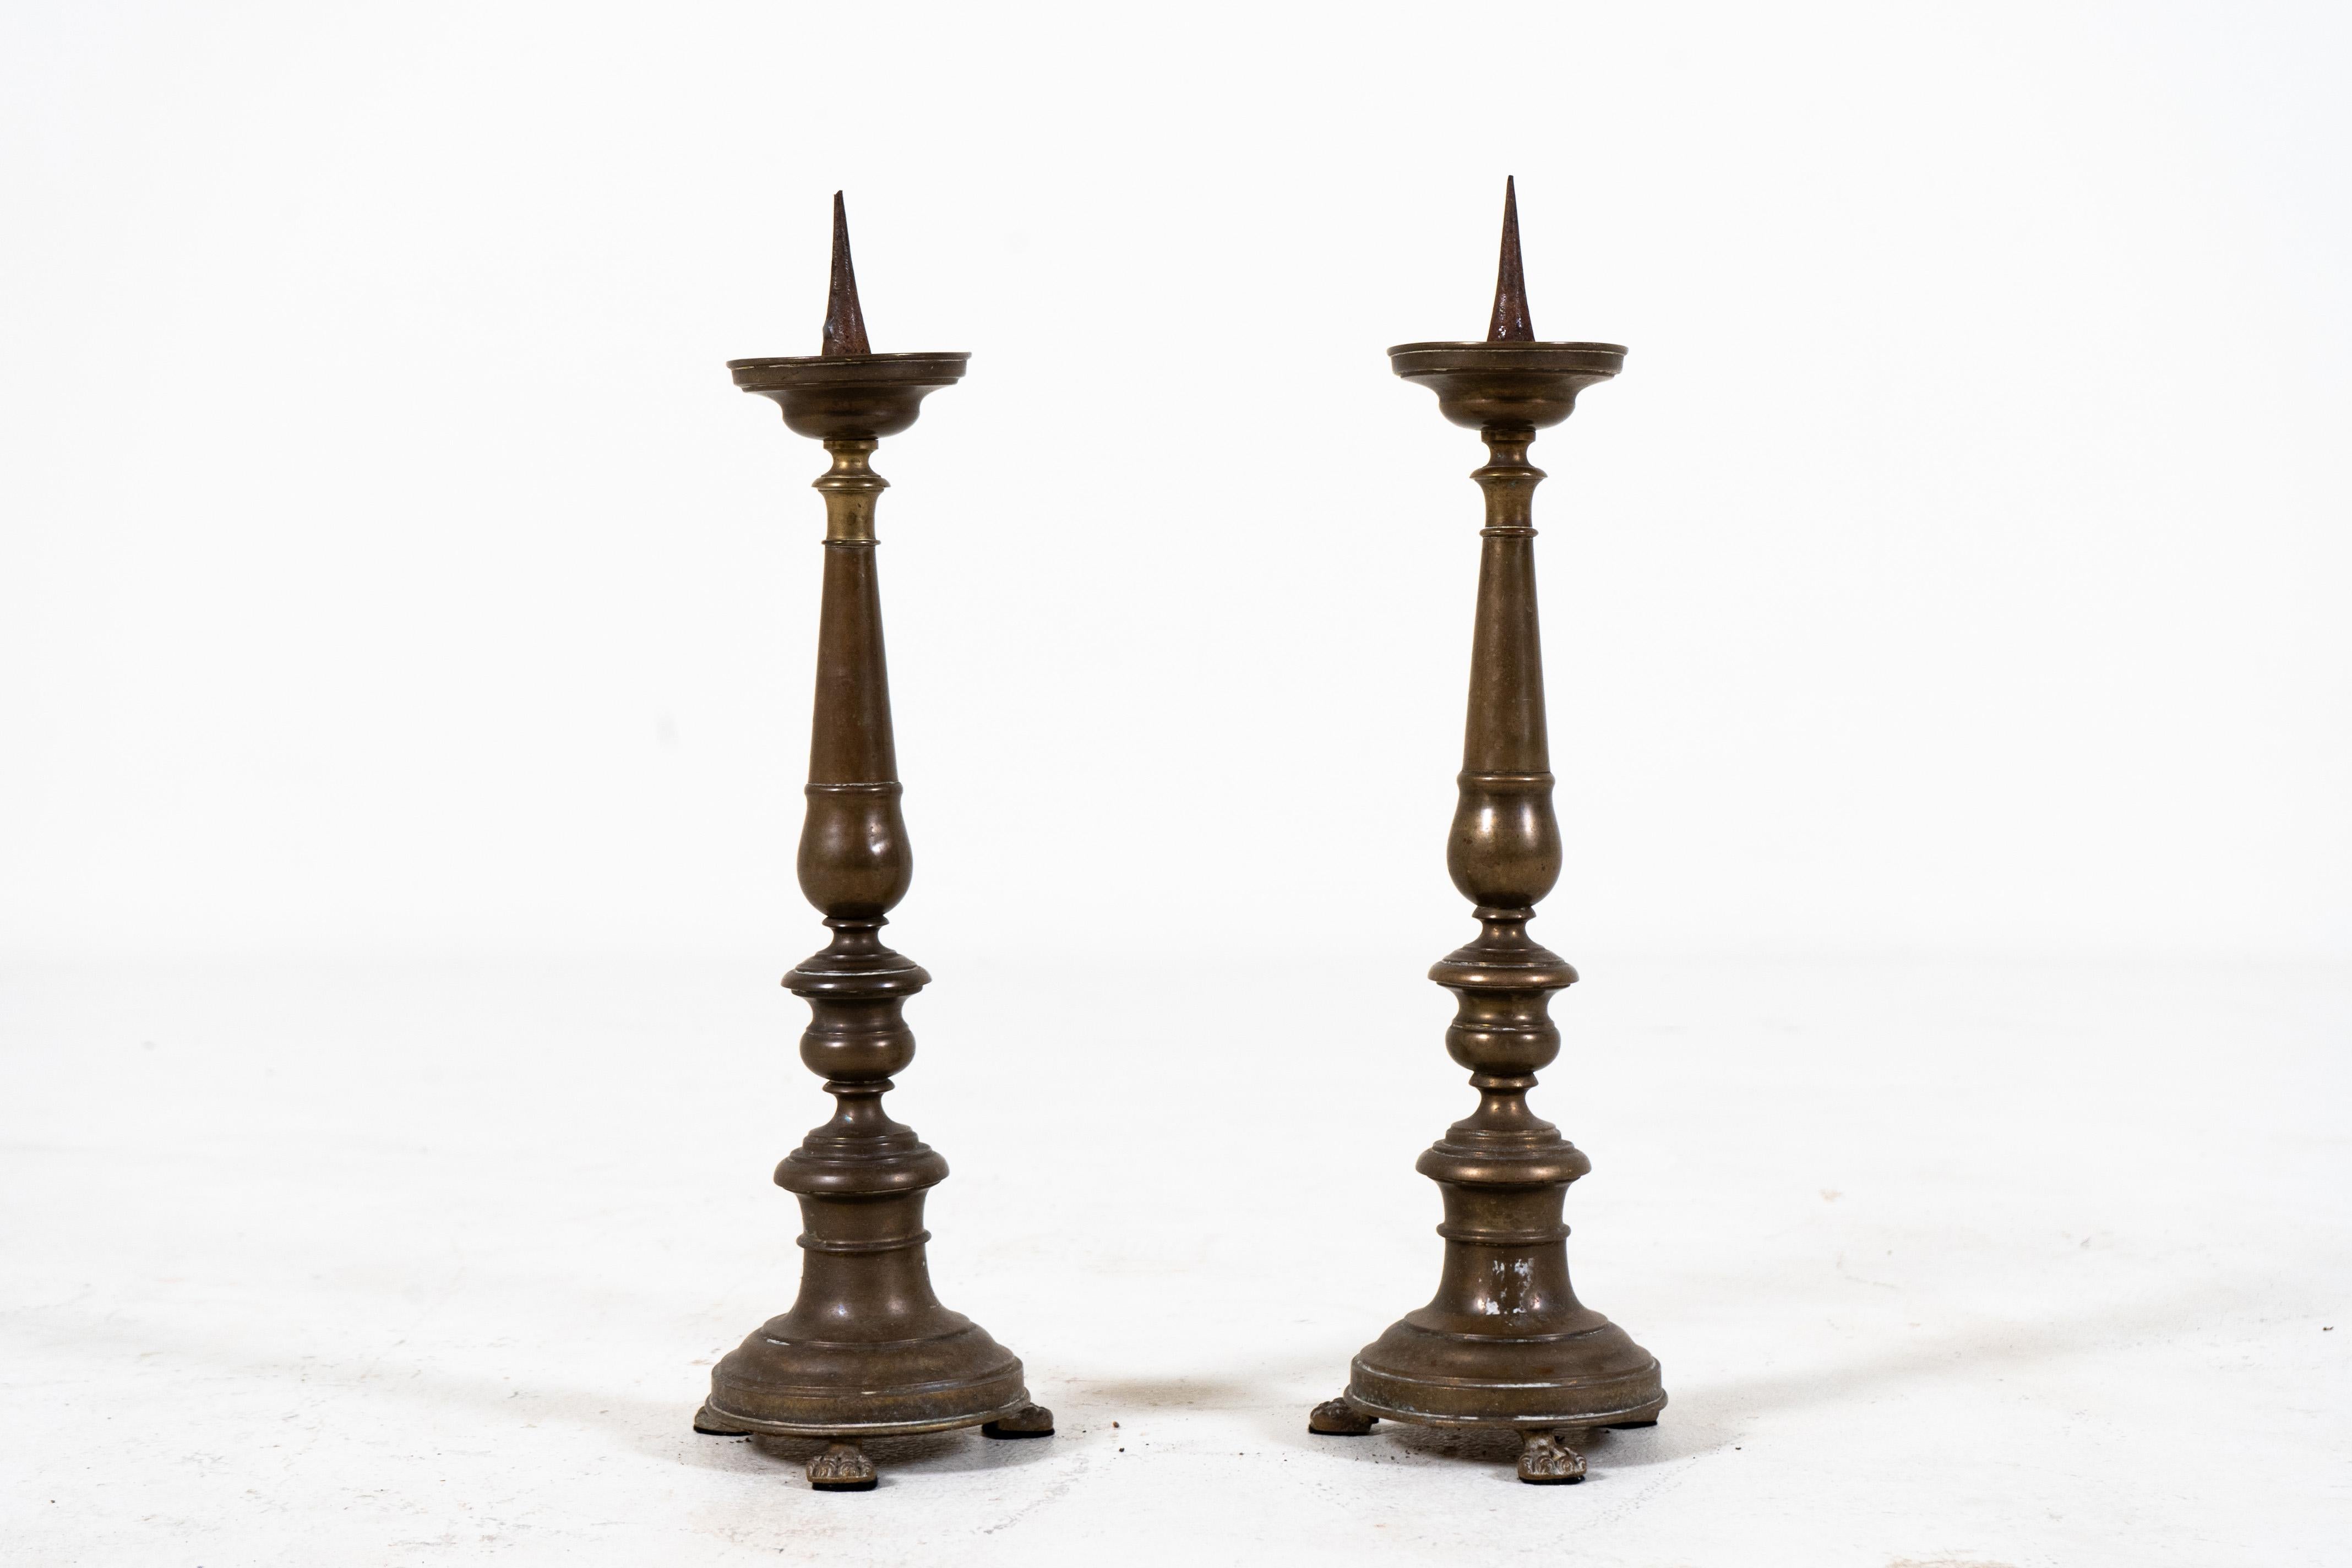 This simple and elegant set of candleholders was found in the south of France, near Avignon. The surface patina, once polished, has grown muted and flat due to exposure and use. The candle socket can accept wax candles up to 3